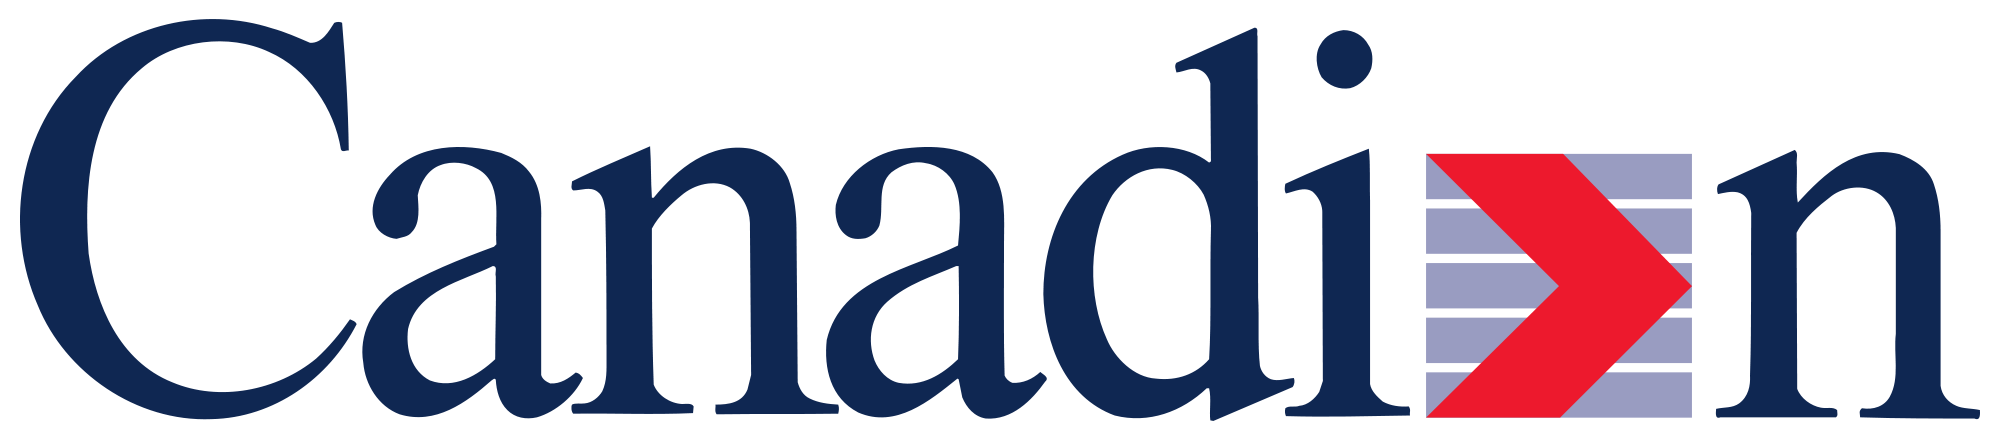 Canadian Logo - File:Canadian Airlines logo (historic).svg - Wikimedia Commons